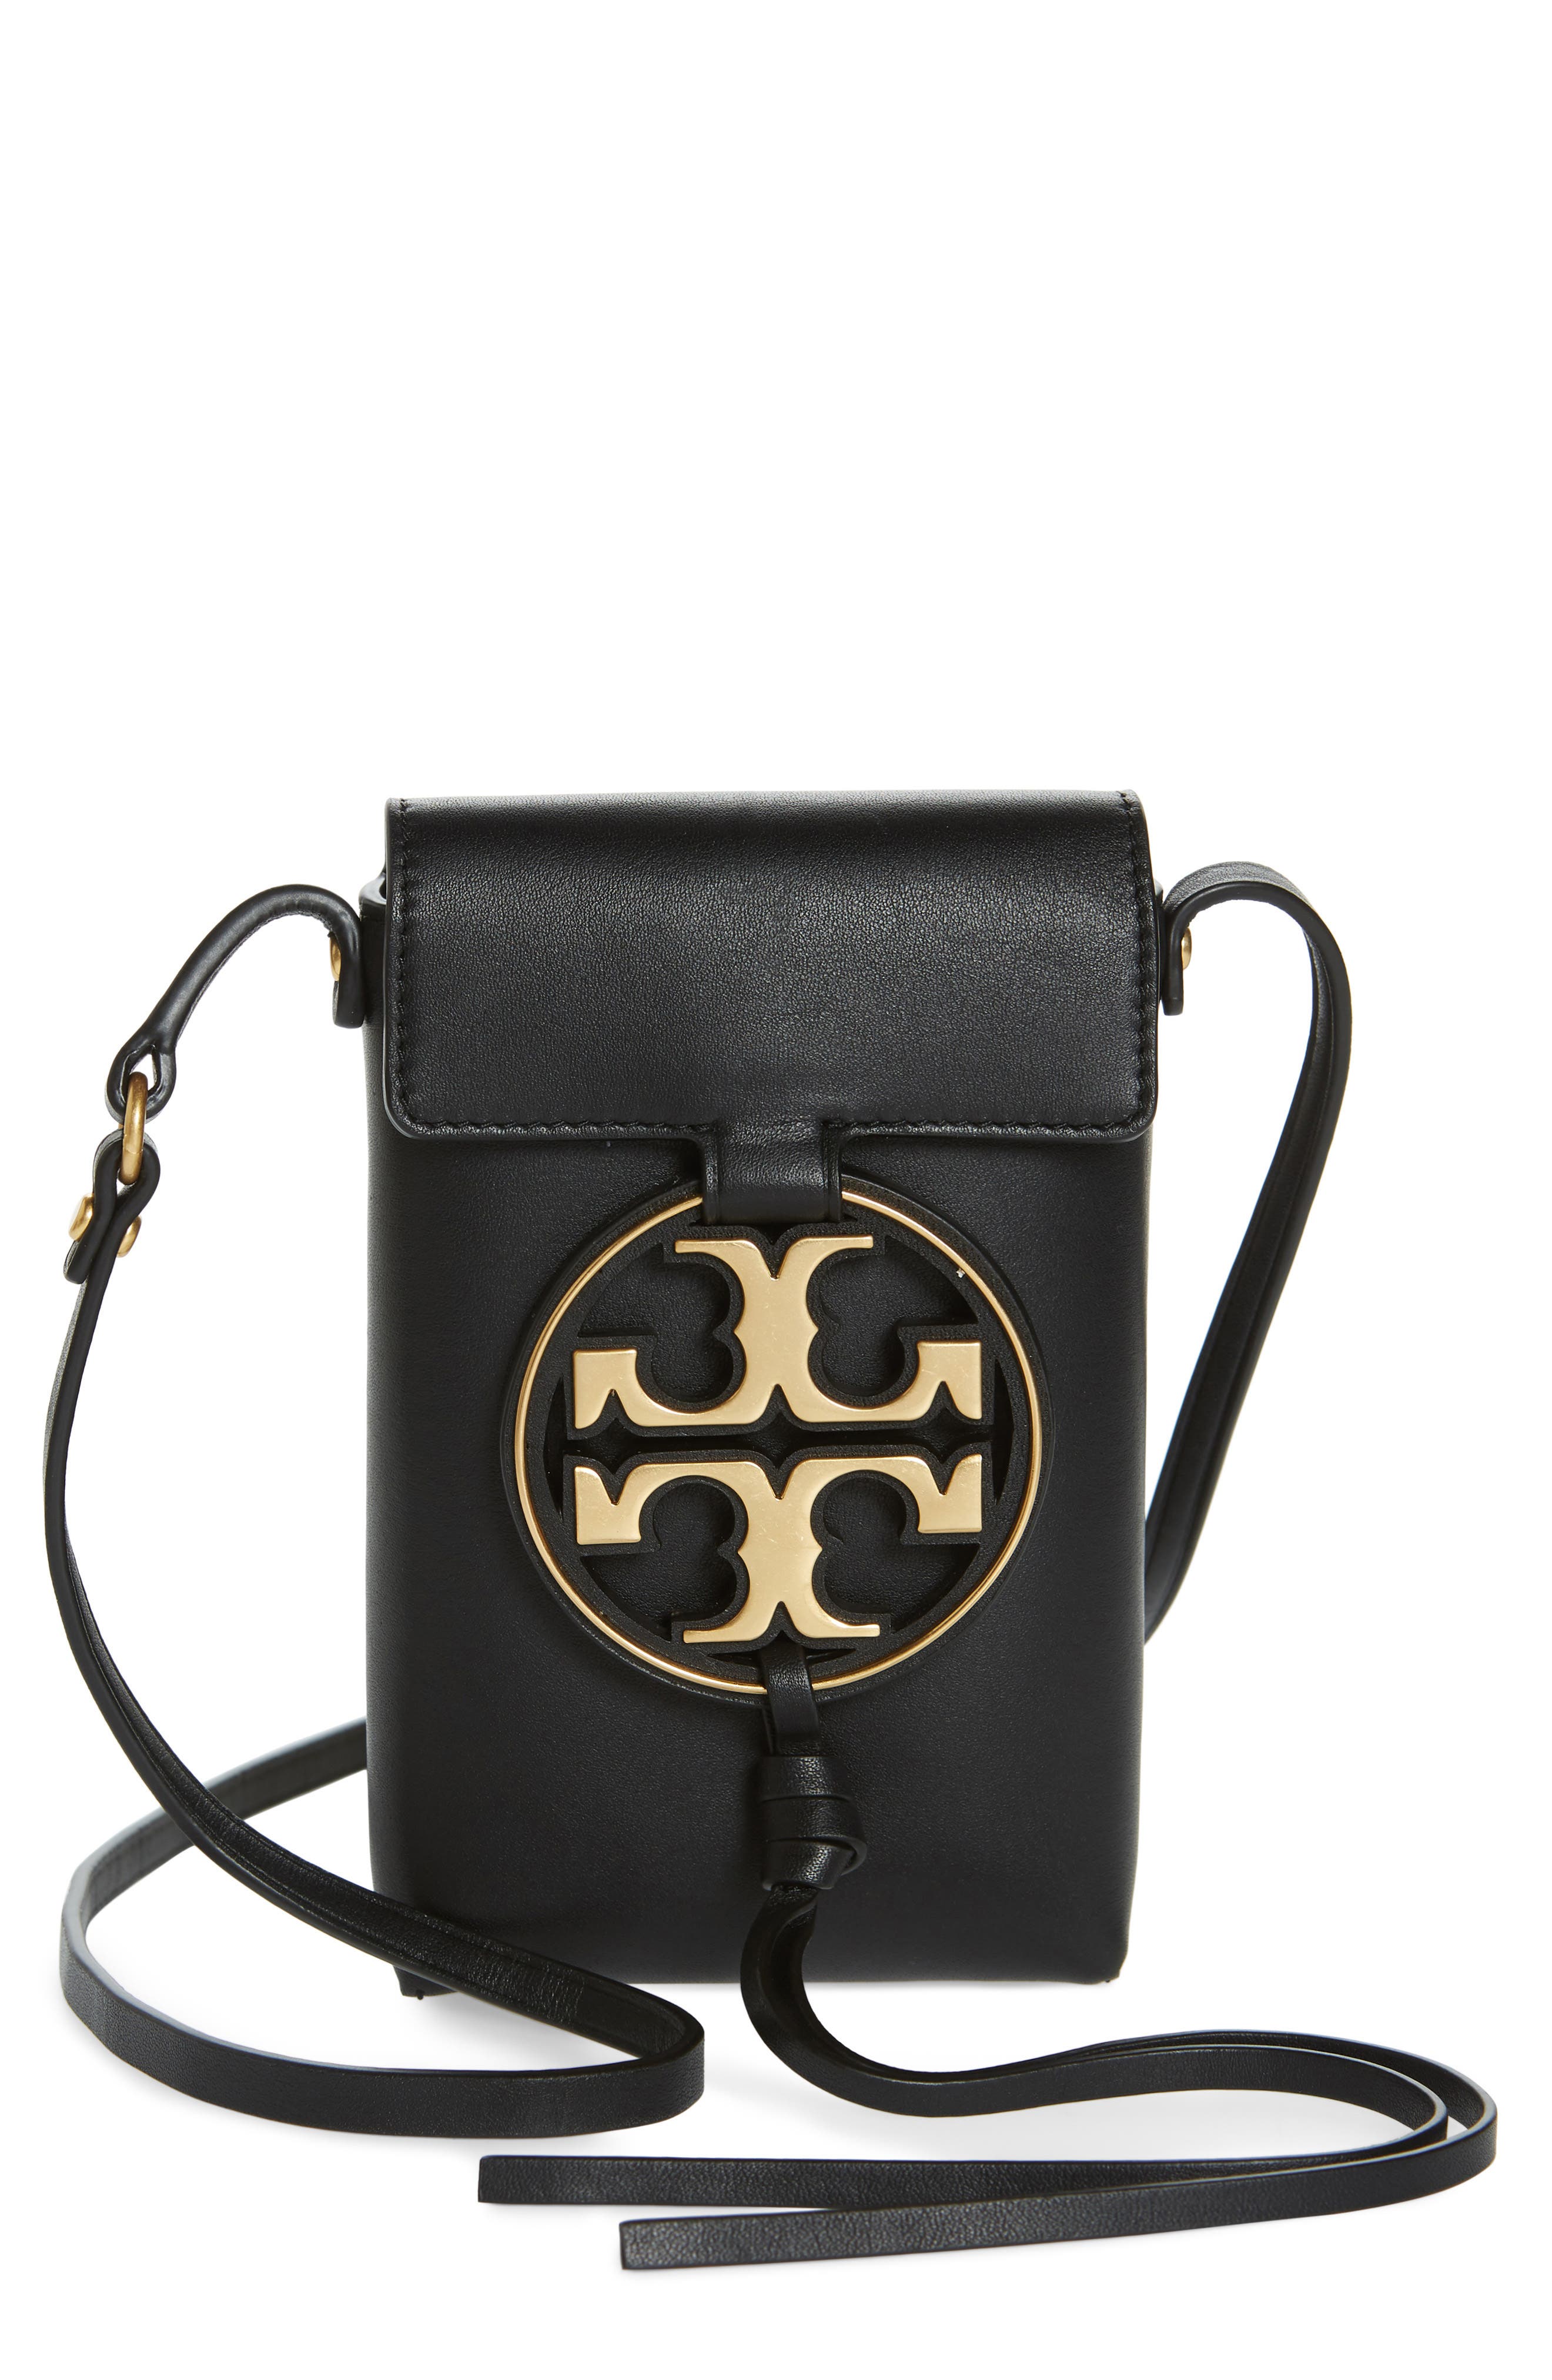 Tory Burch Miller Leather Phone 